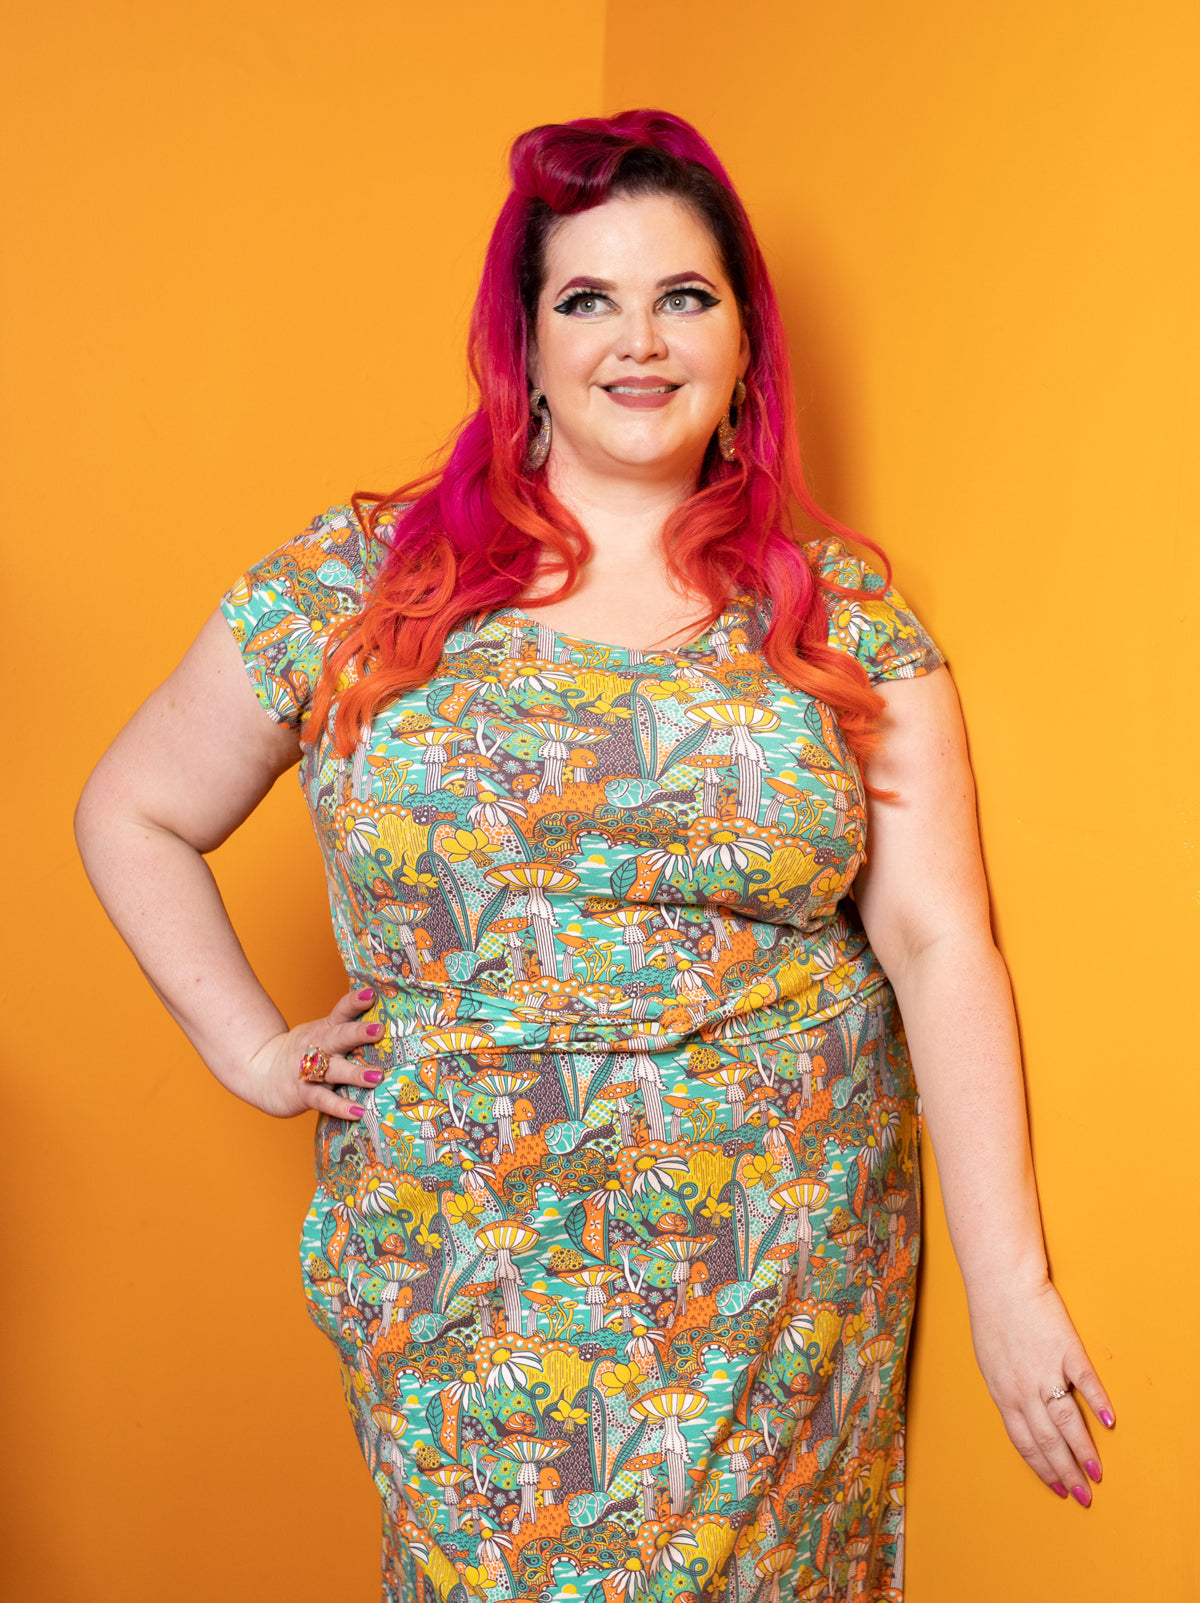 Model wearing twist belt, cap-sleeved dress featuring yellow, orange and green mushrooms, snails and flowers